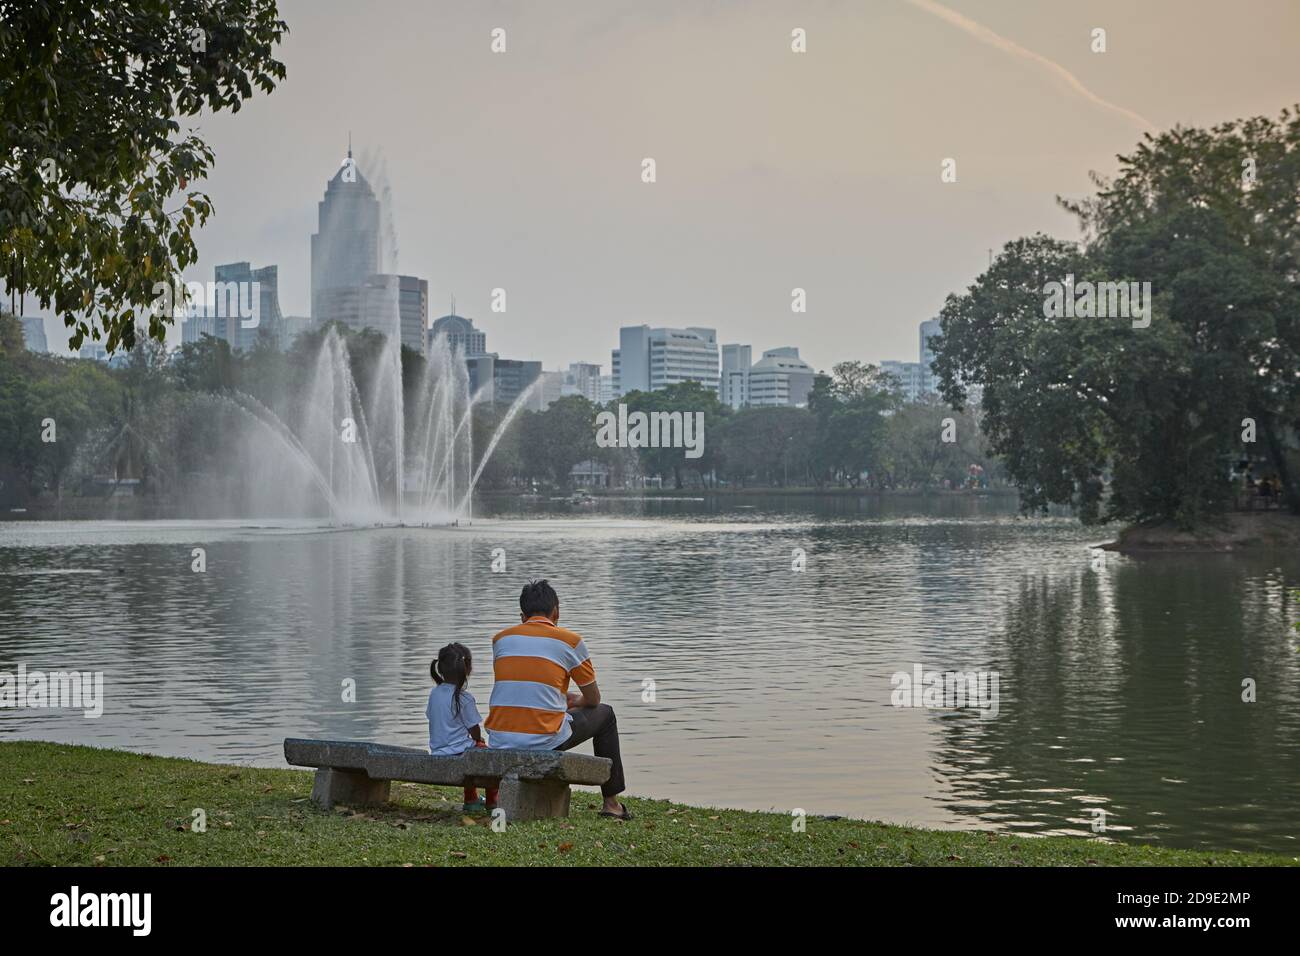 Bangkok, Thailand, March 2106. A father and his daughter sitting on a bench look out over the lake in Lumpini Park. Stock Photo